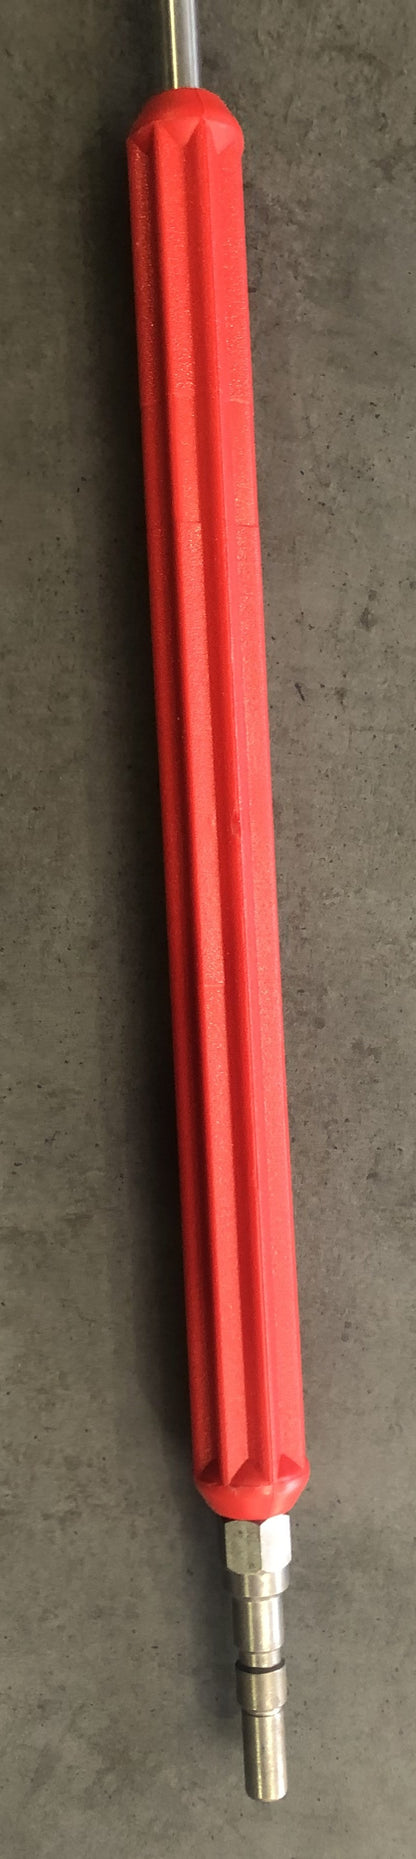 JW RED STRAIGHT- STAINLESS STEEL SINGLE LANCE